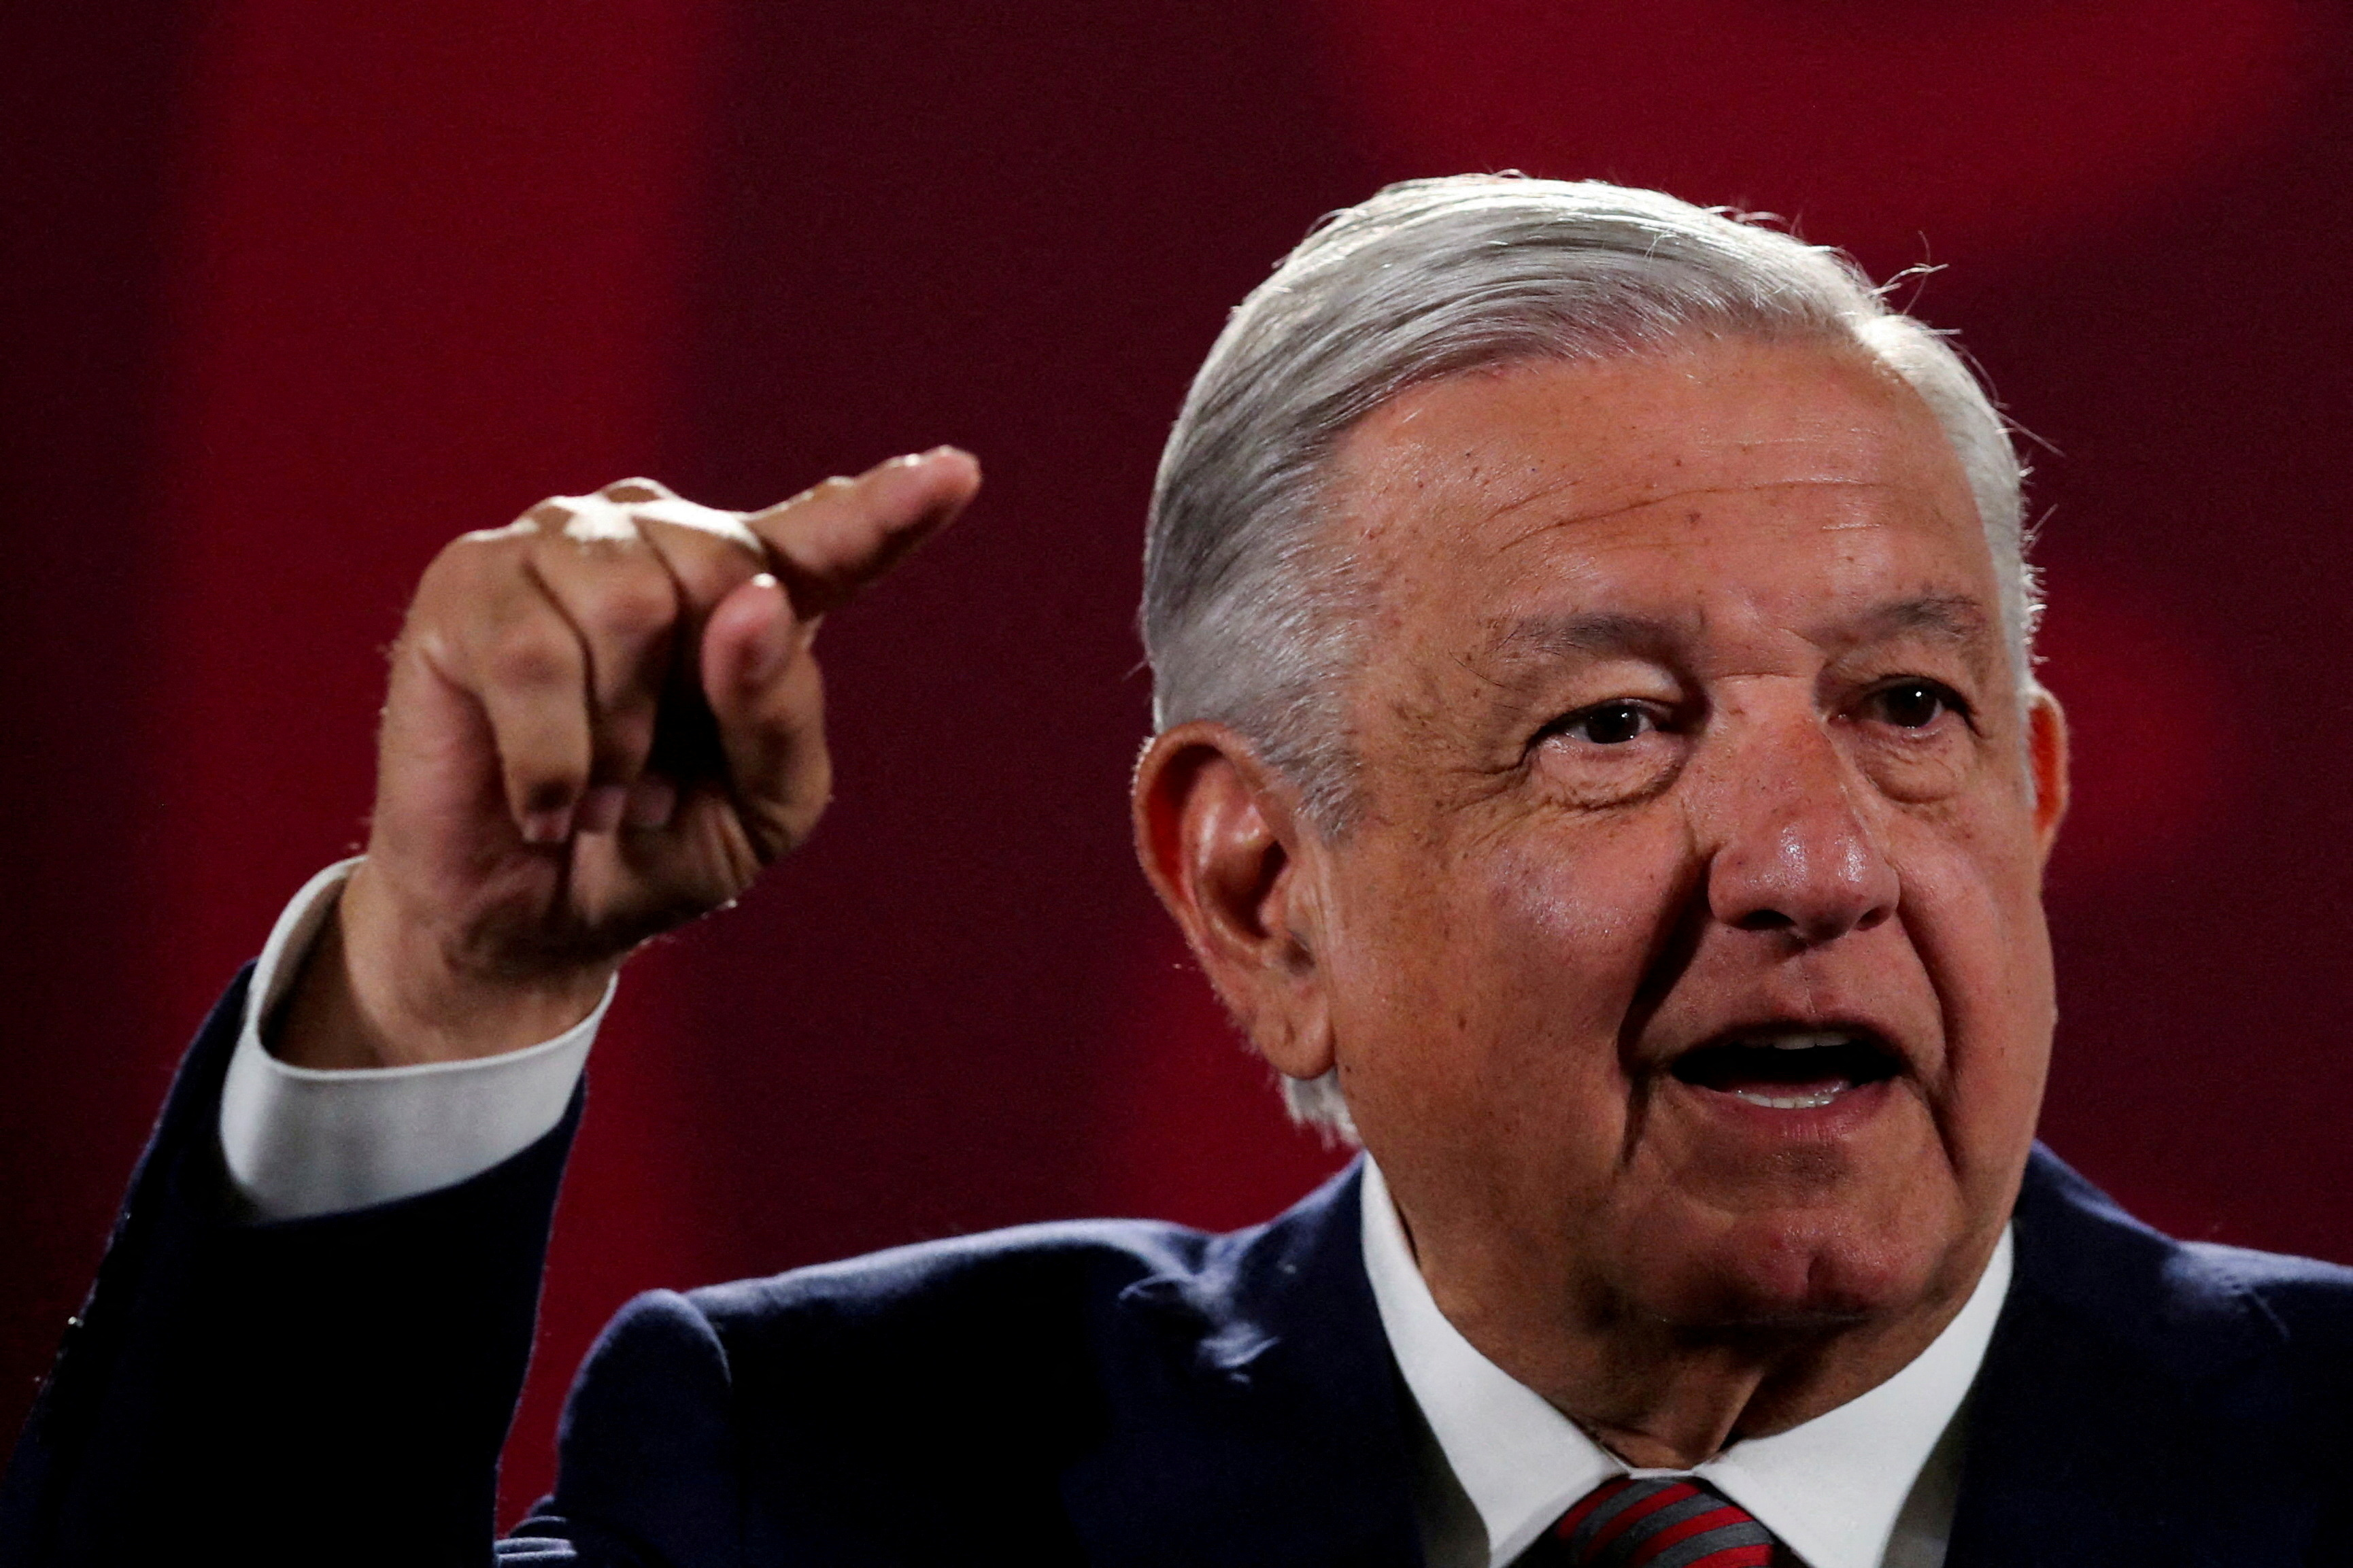 FILE PHOTO: Mexico's President Andres Manuel Lopez Obrador gestures during a news conference at the National Palace in Mexico City, Mexico June 20, 2022. REUTERS/Edgard Garrido//File Photo